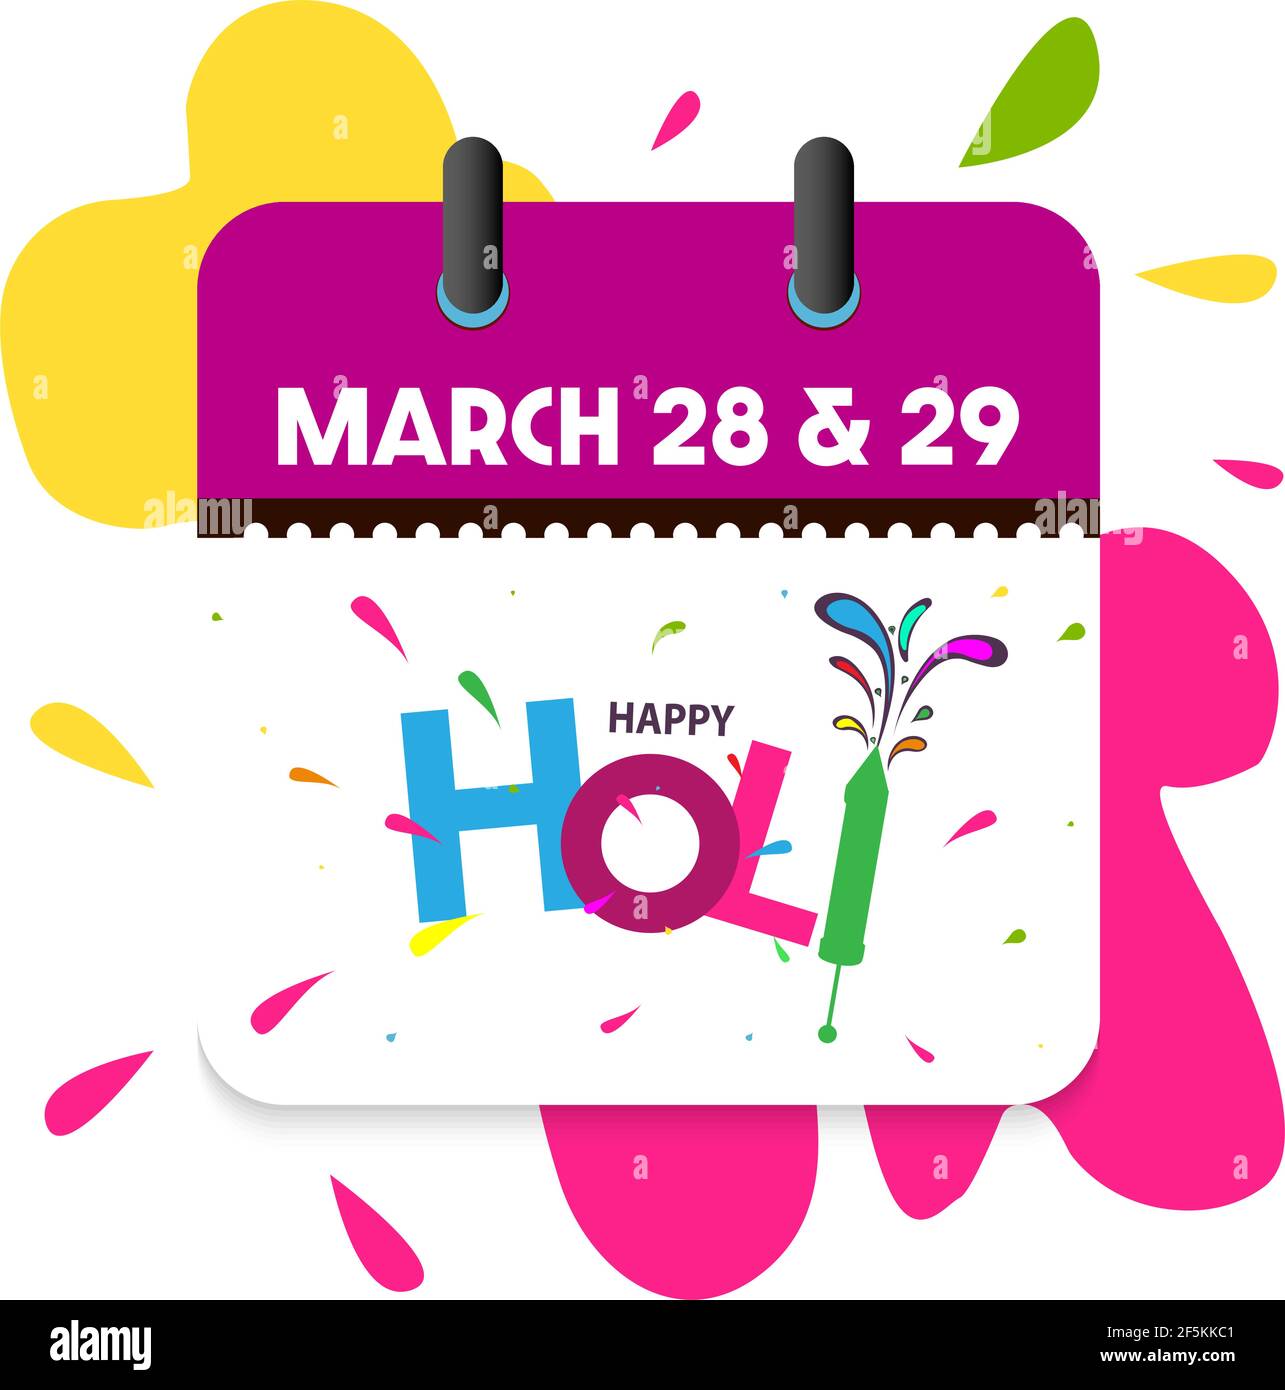 Vector illustration of Happy Holi Indian Hindu Festival of Colors